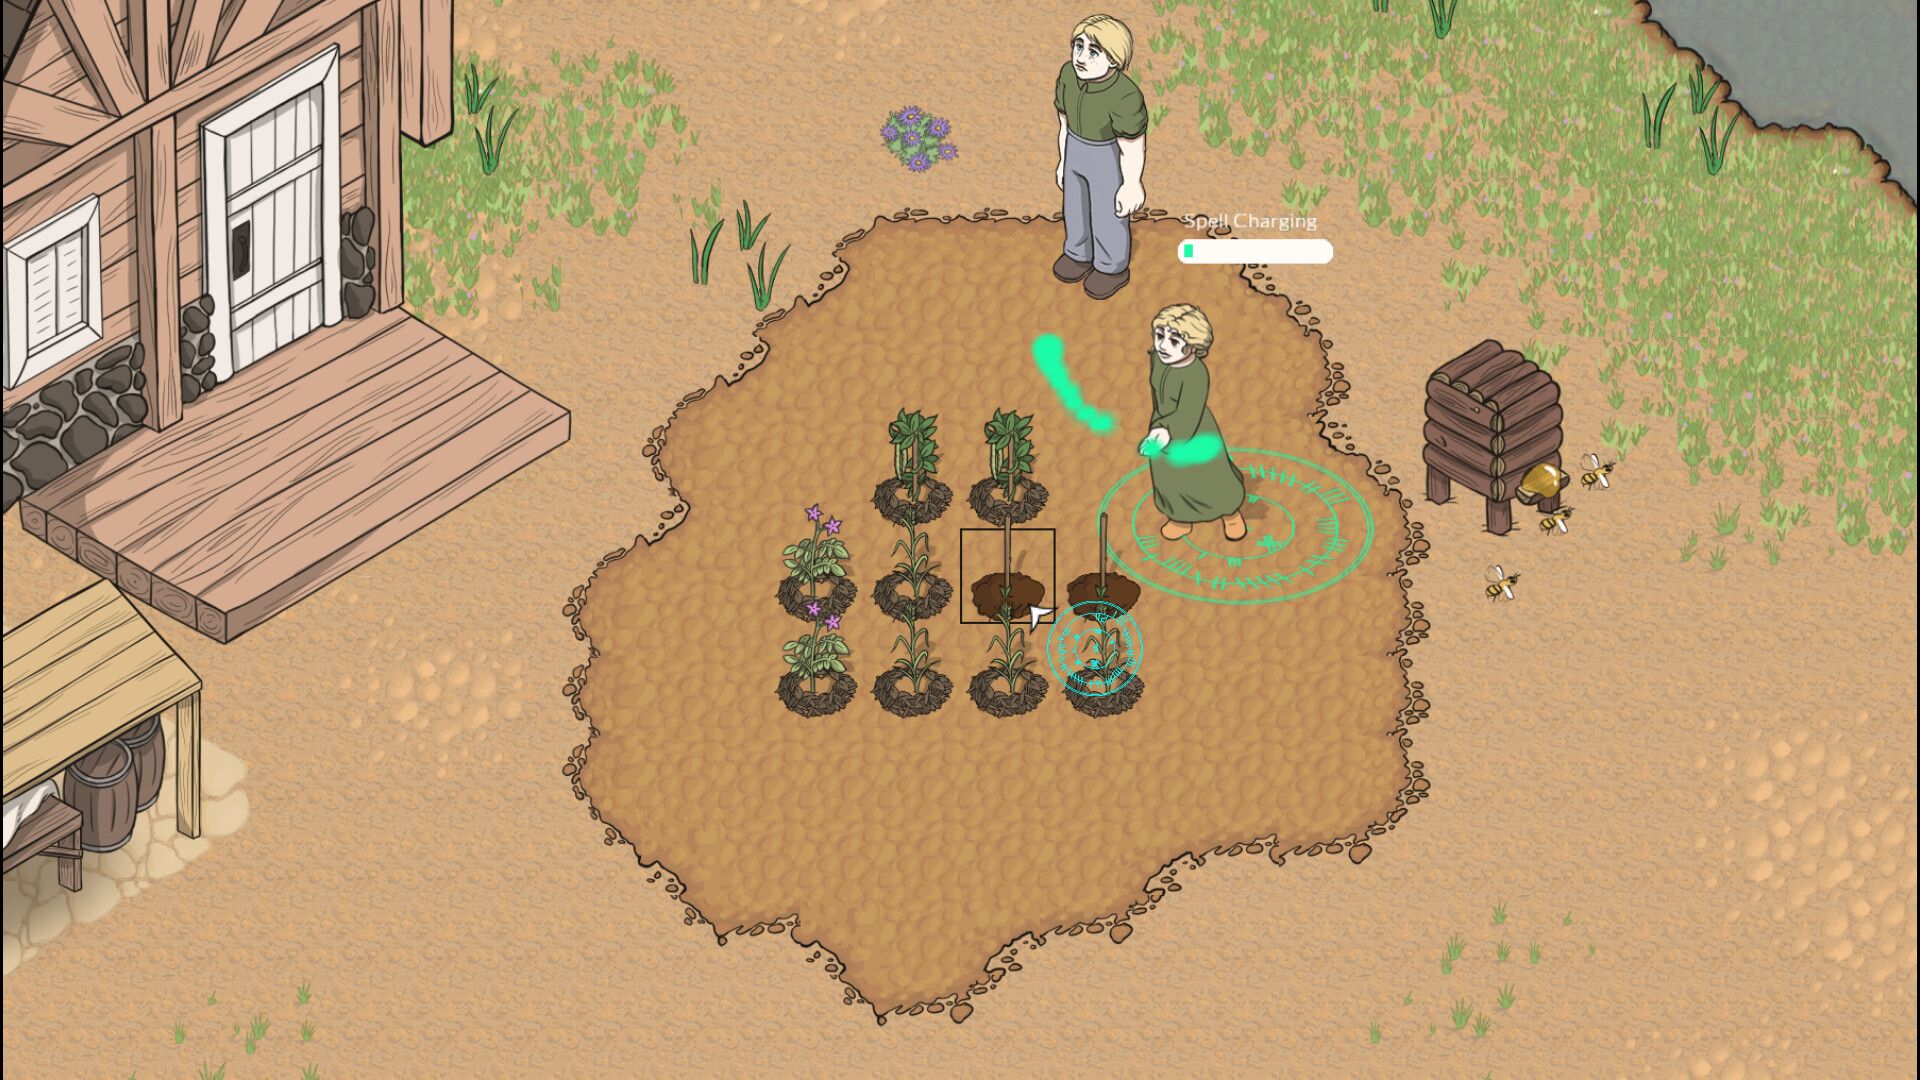 Farming your small plot in Veil Of Dust